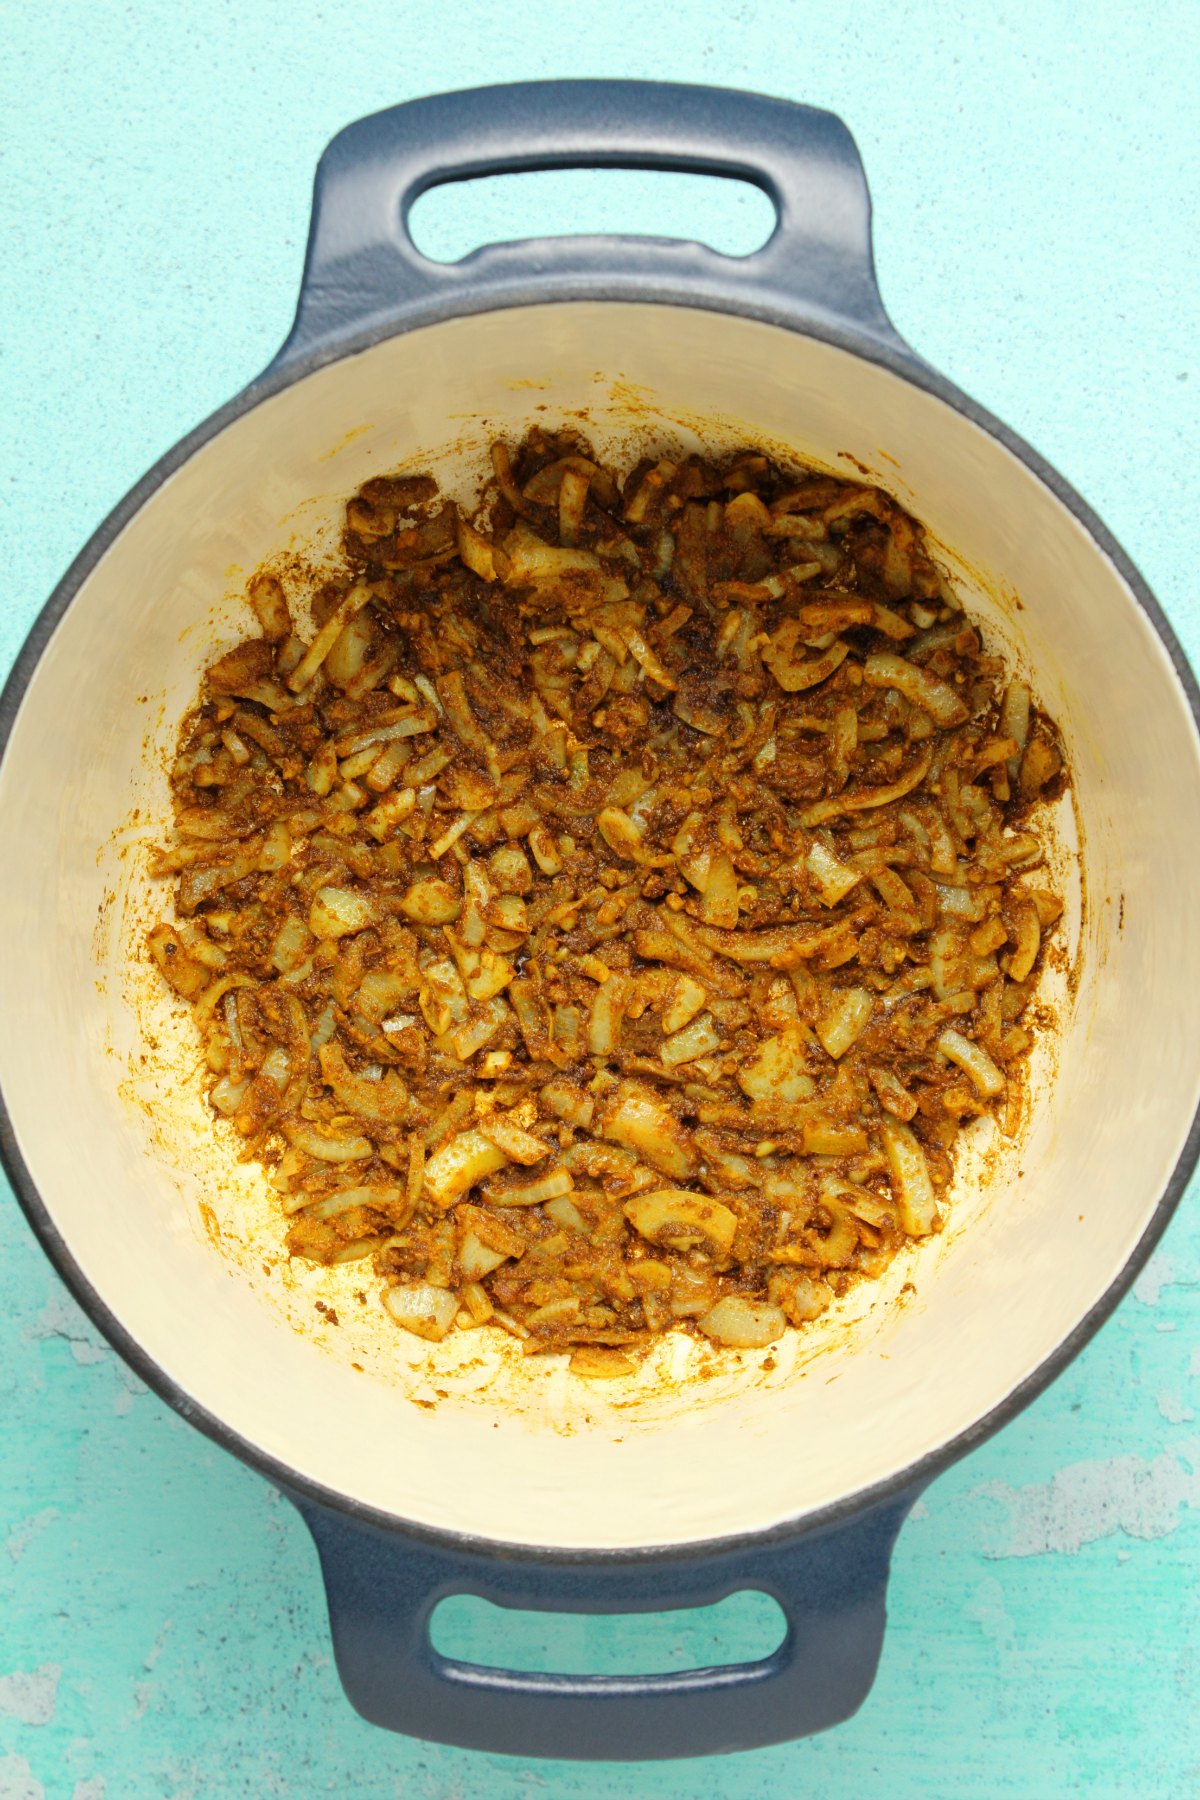 Sautéed onions and spices in a pot.